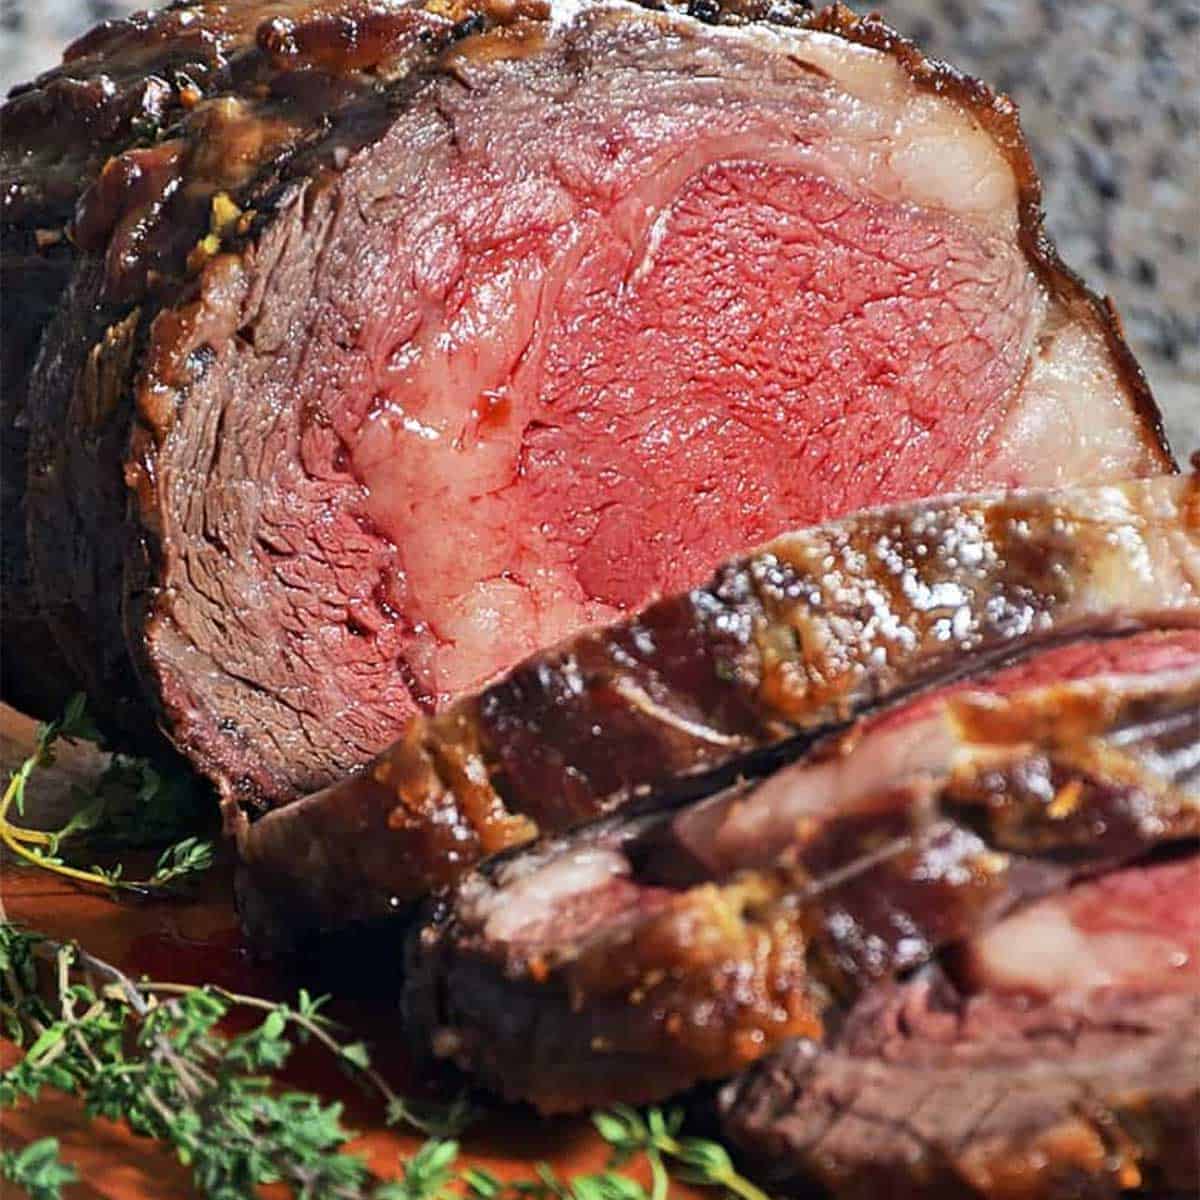 Slow roasted prime rib sliced on a cutting board with herbs